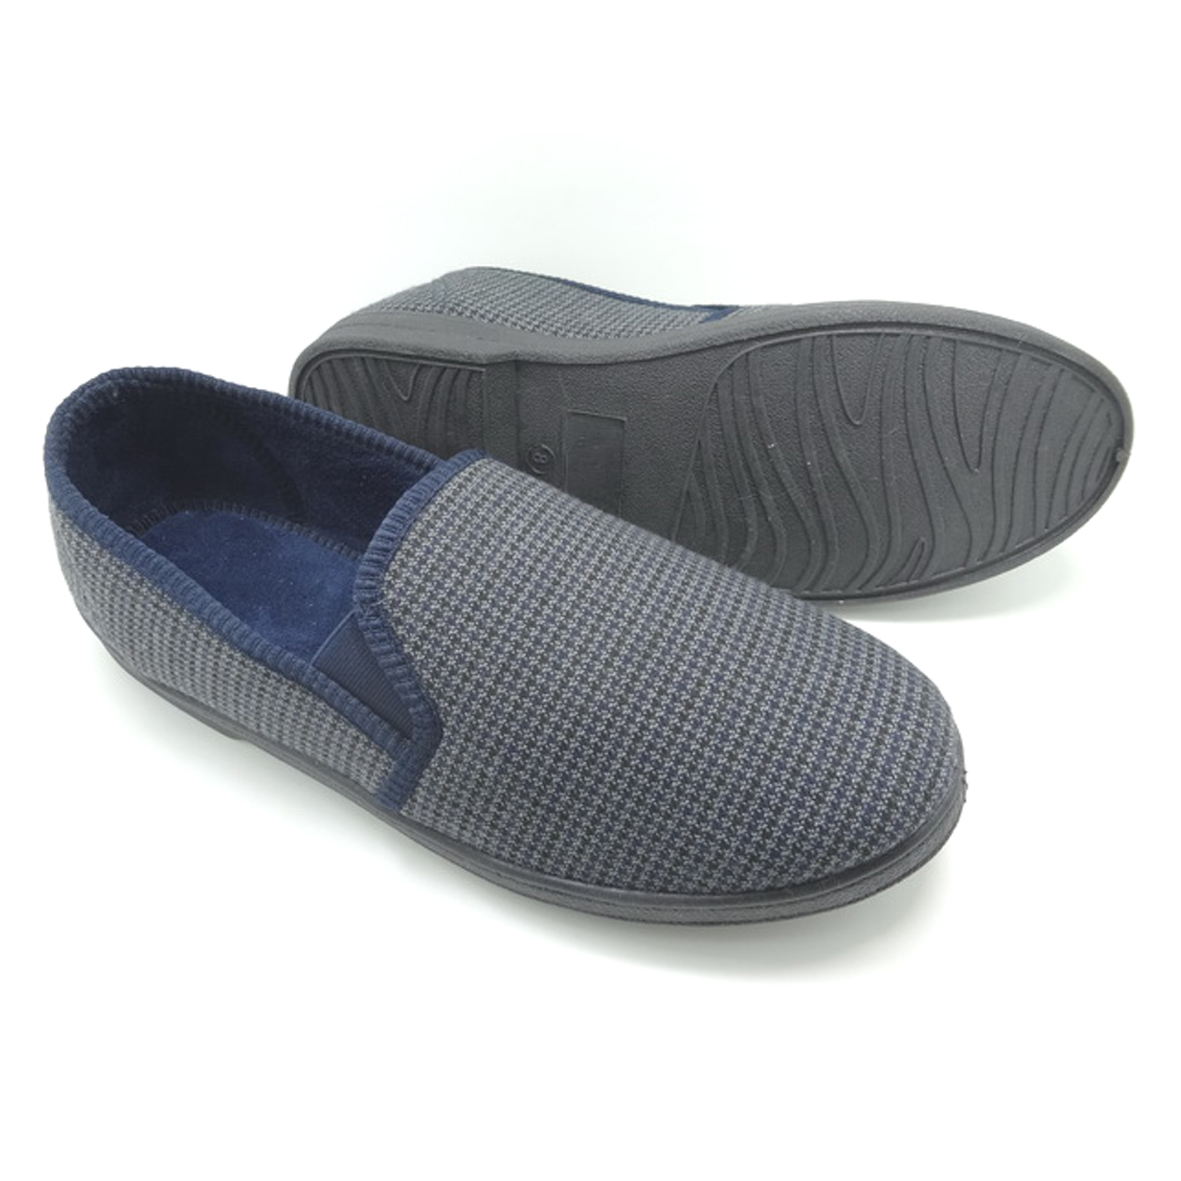 Men's Felt Casual Shoes with Microsuede Lining Slip-On Loafer 